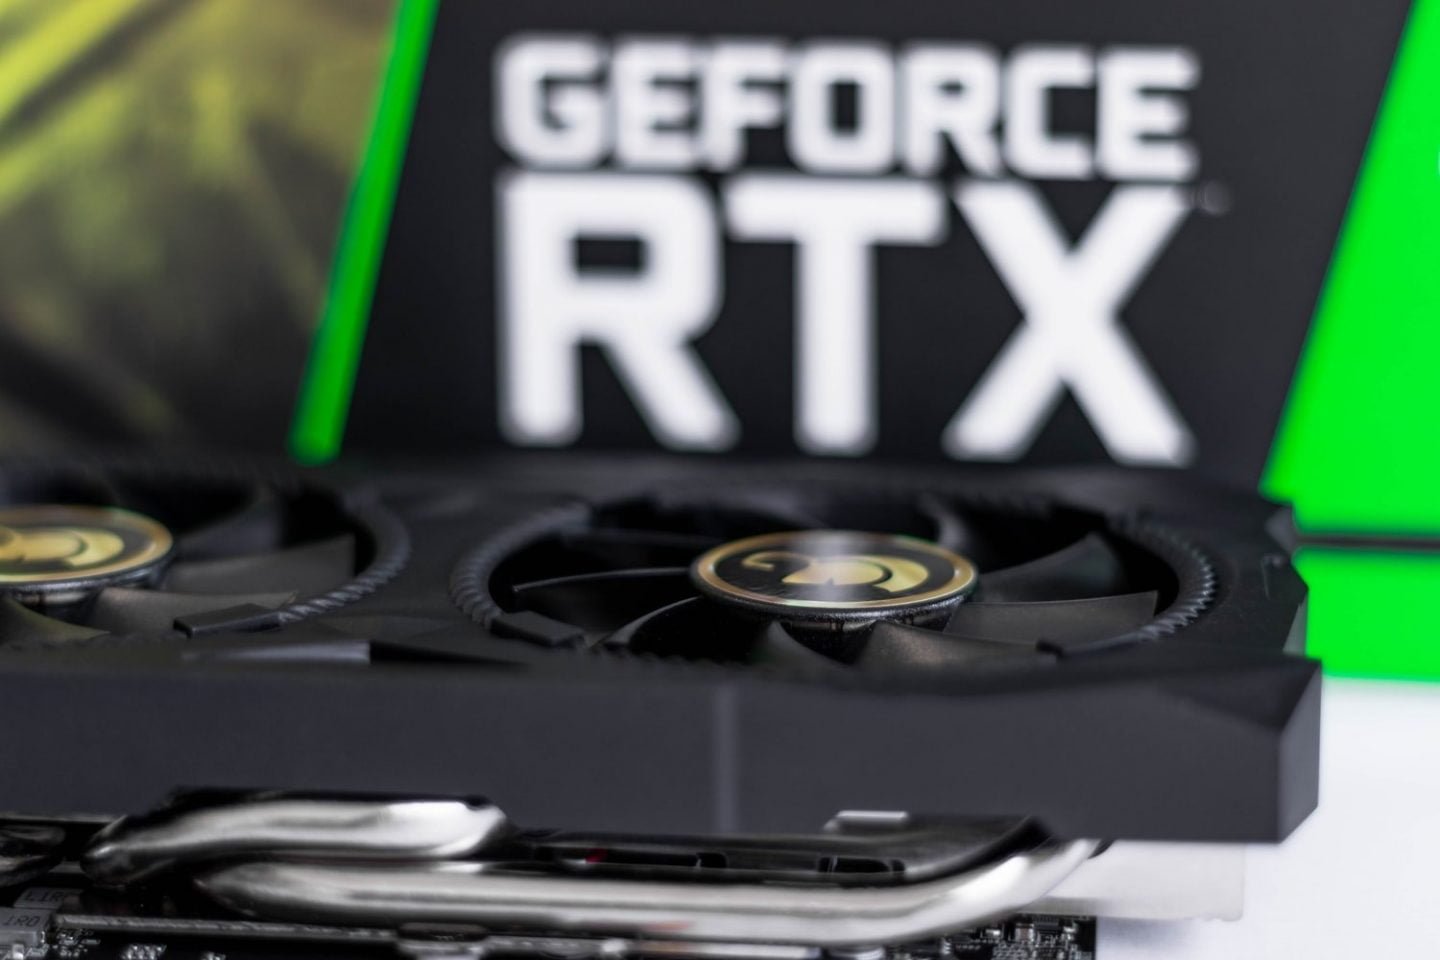 Specs leaked NVIDIA’s GeForce RTX 3080 and RTX 3070 detailed